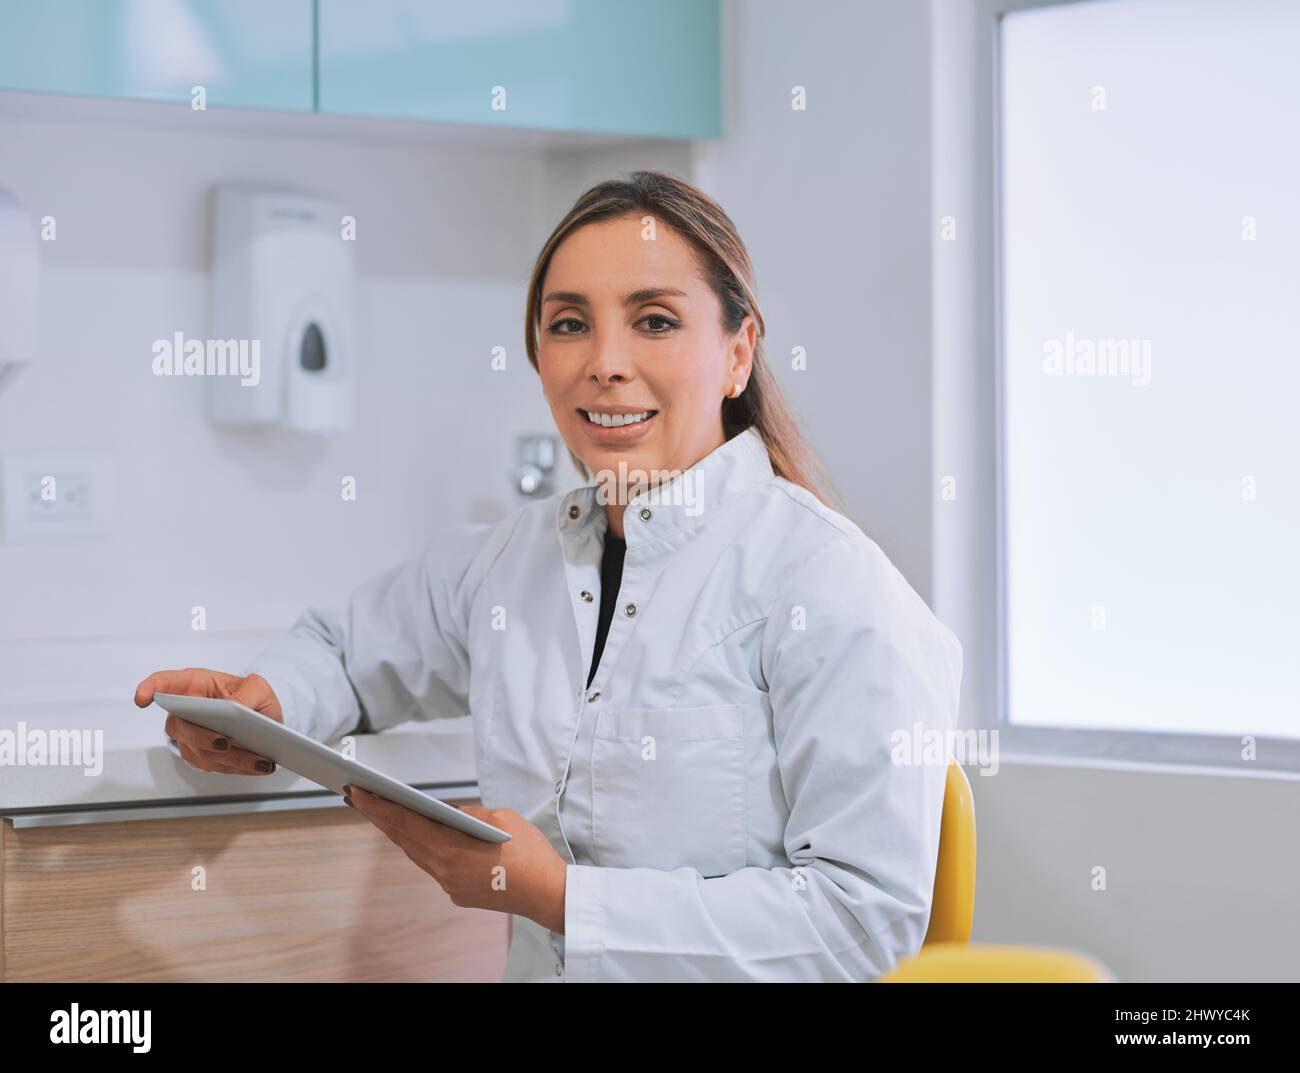 Looking after your oral health. Portrait of a cheerful young female dentist working on her digital tablet while looking at the camera in her office. Stock Photo